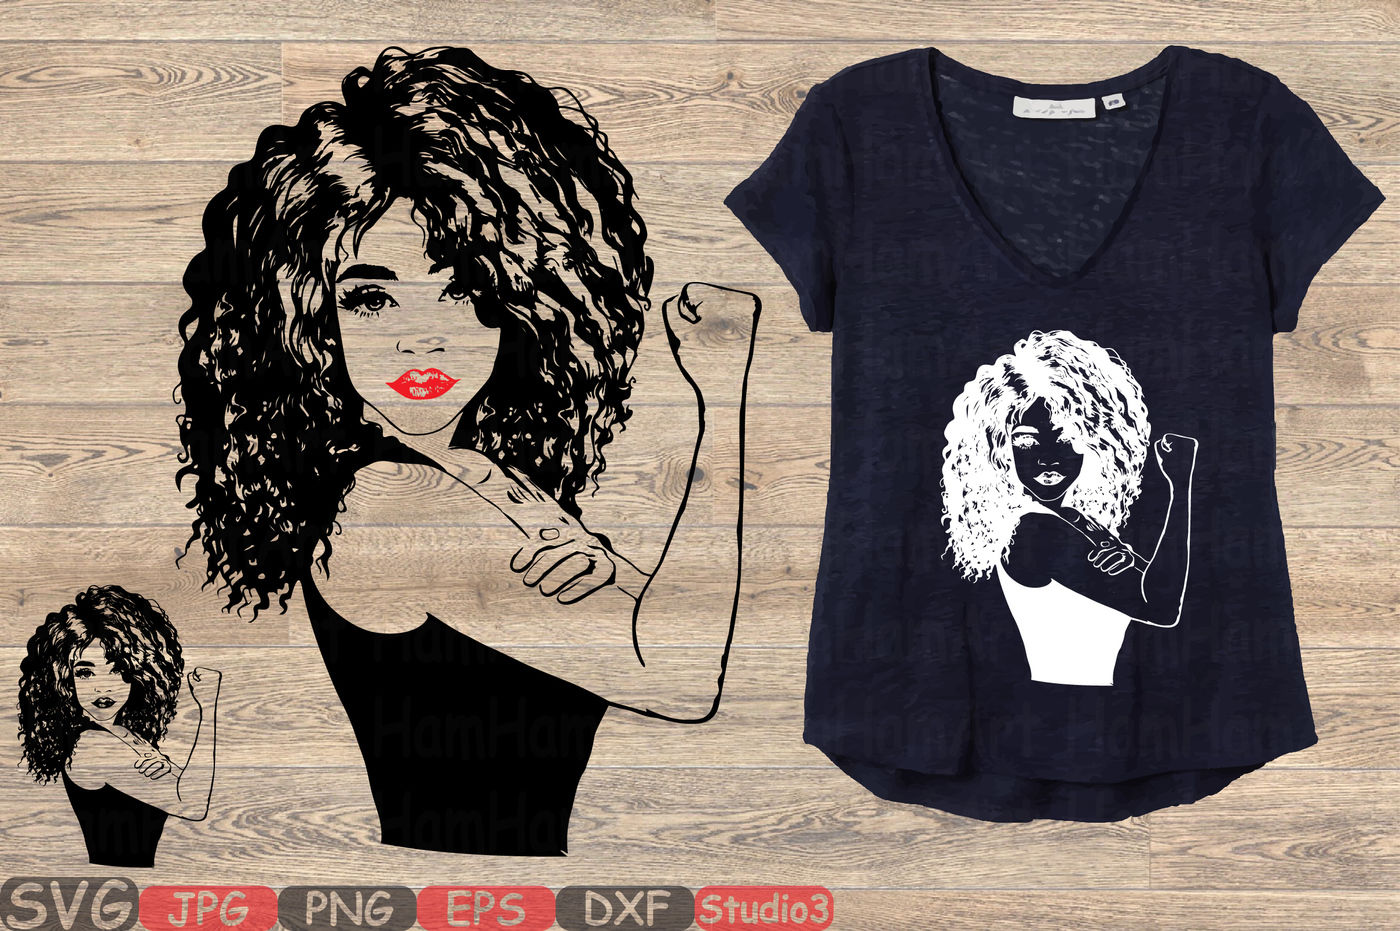 Download Girl Power Silhouette SVG afro youth women Black Woman ...